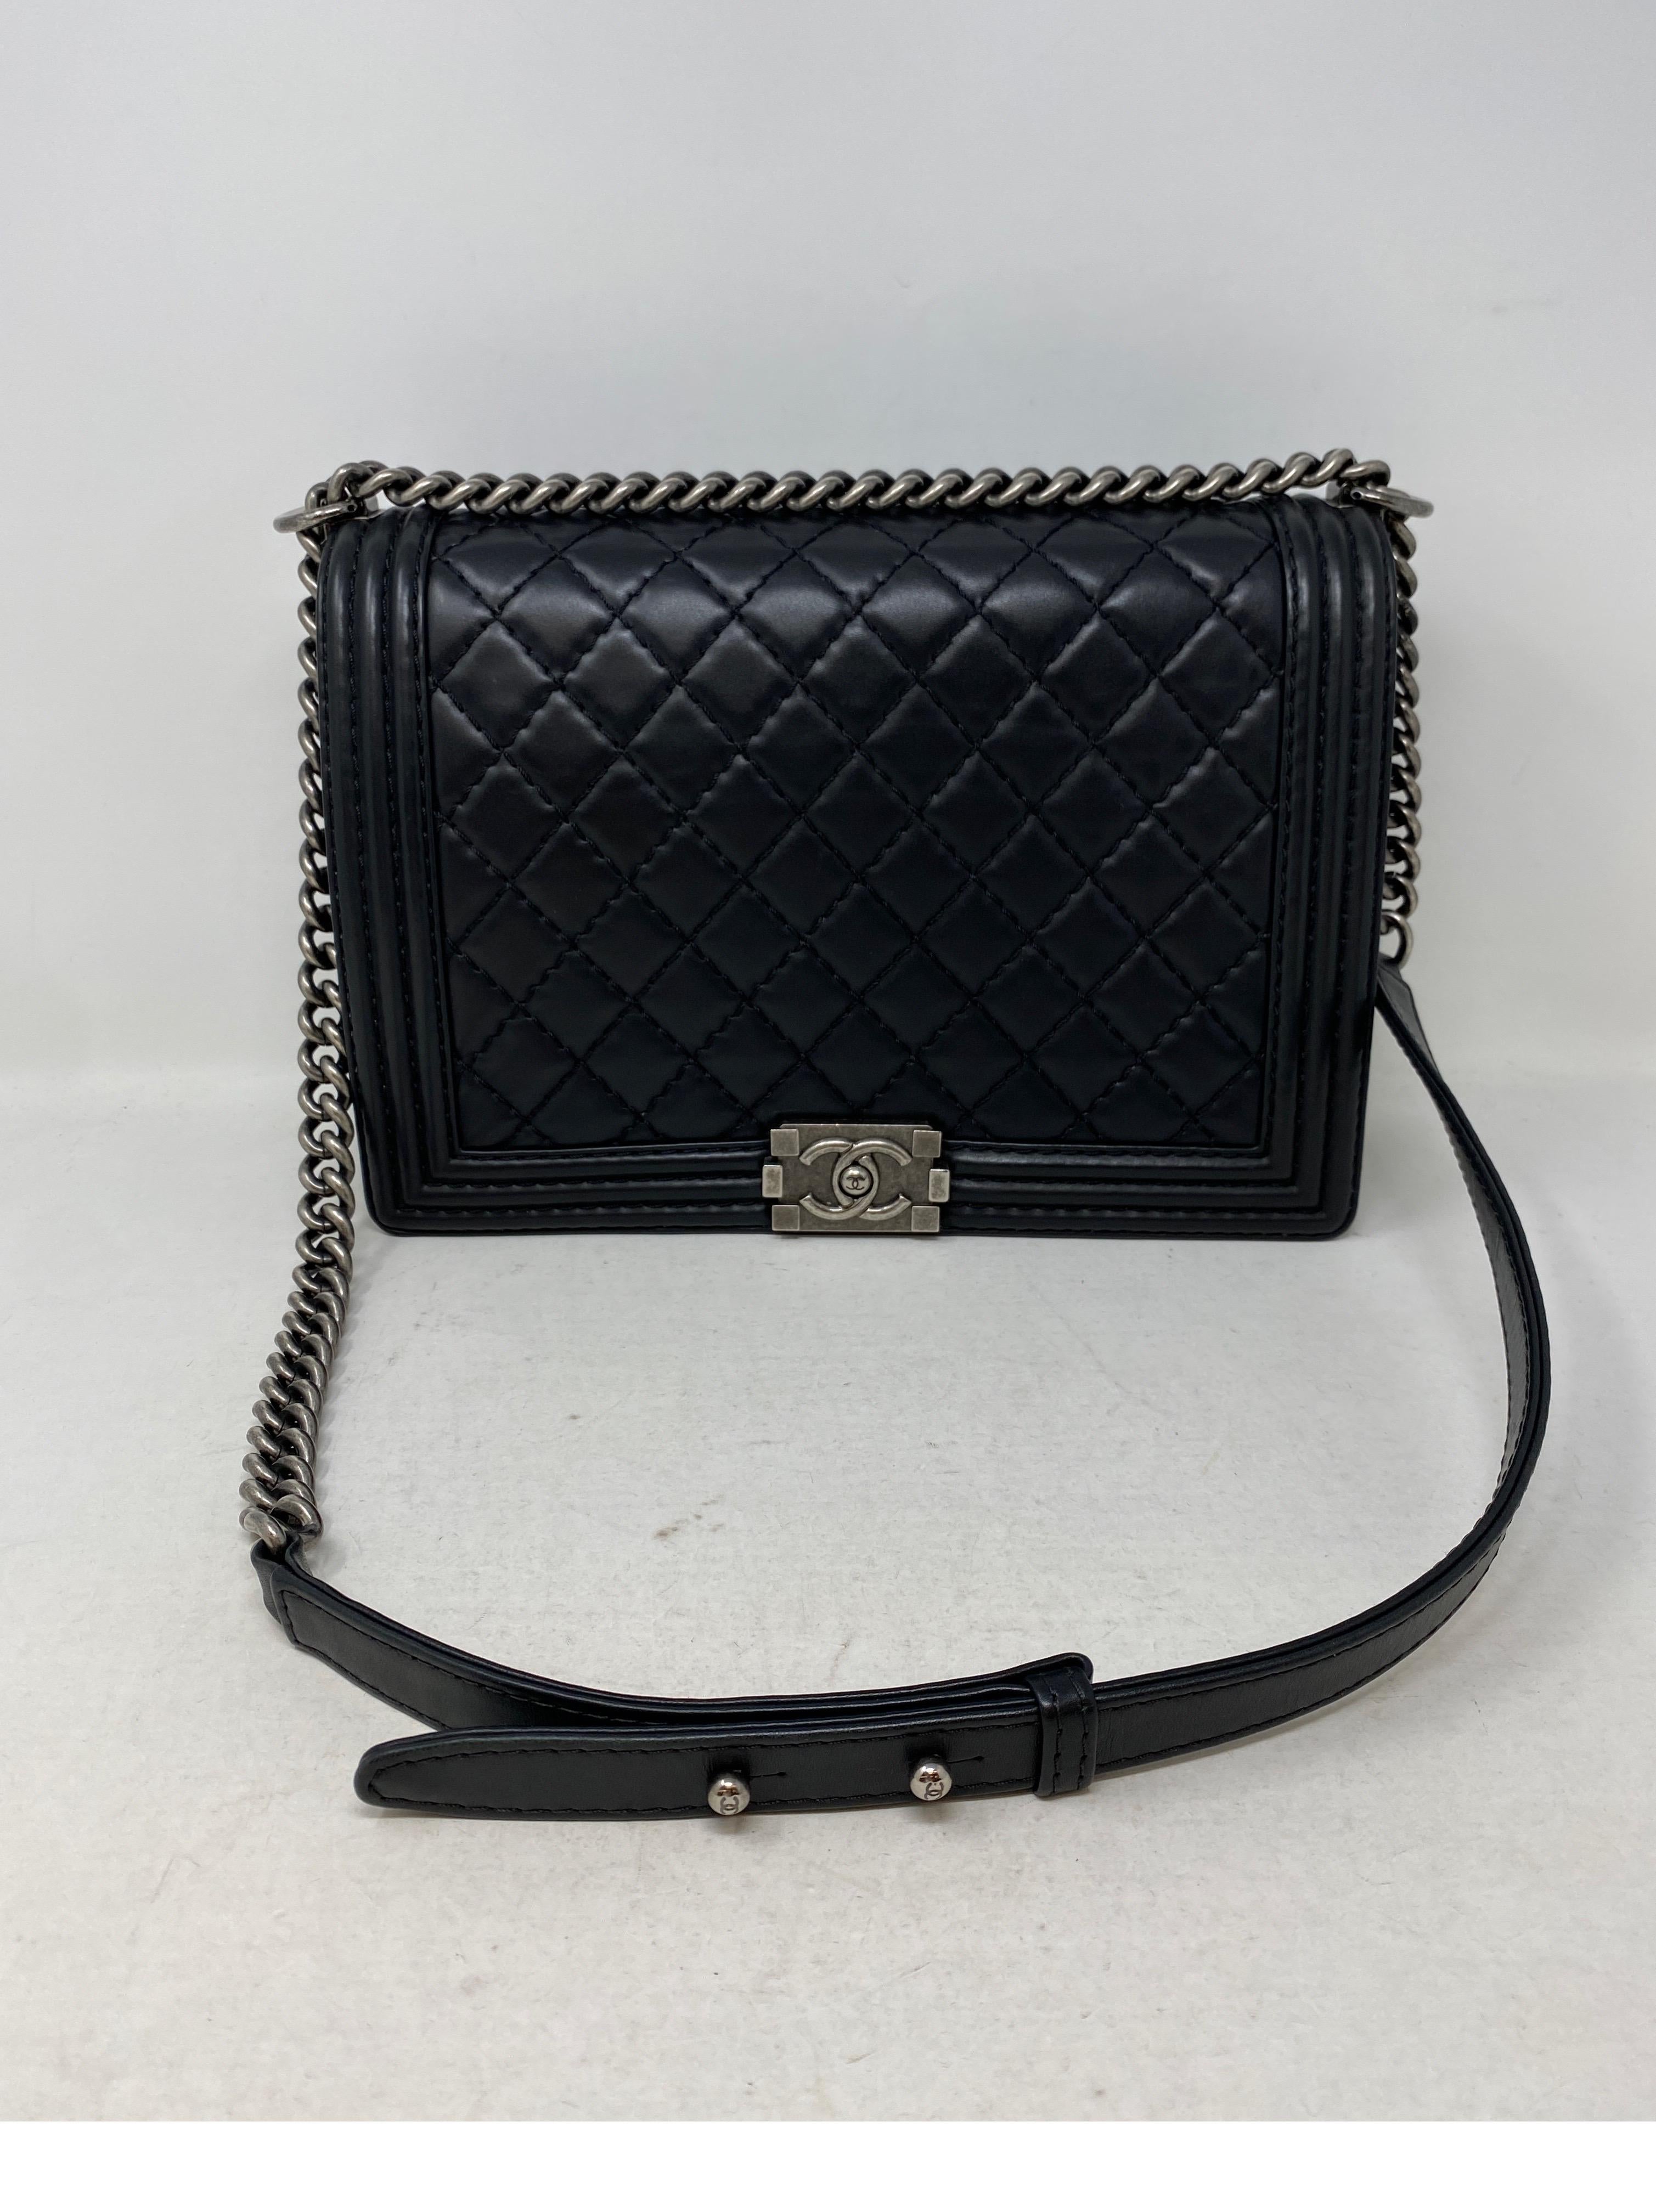 Chanel Black Boy Bag. Large Black Boy bag. Calf leather with ruthenium hardware. Excellent like new condition. Interior clean. Can be worn as a crossbody or doubled as a shoulder bag. Full set. Includes authenticity card, dust bag, and box.